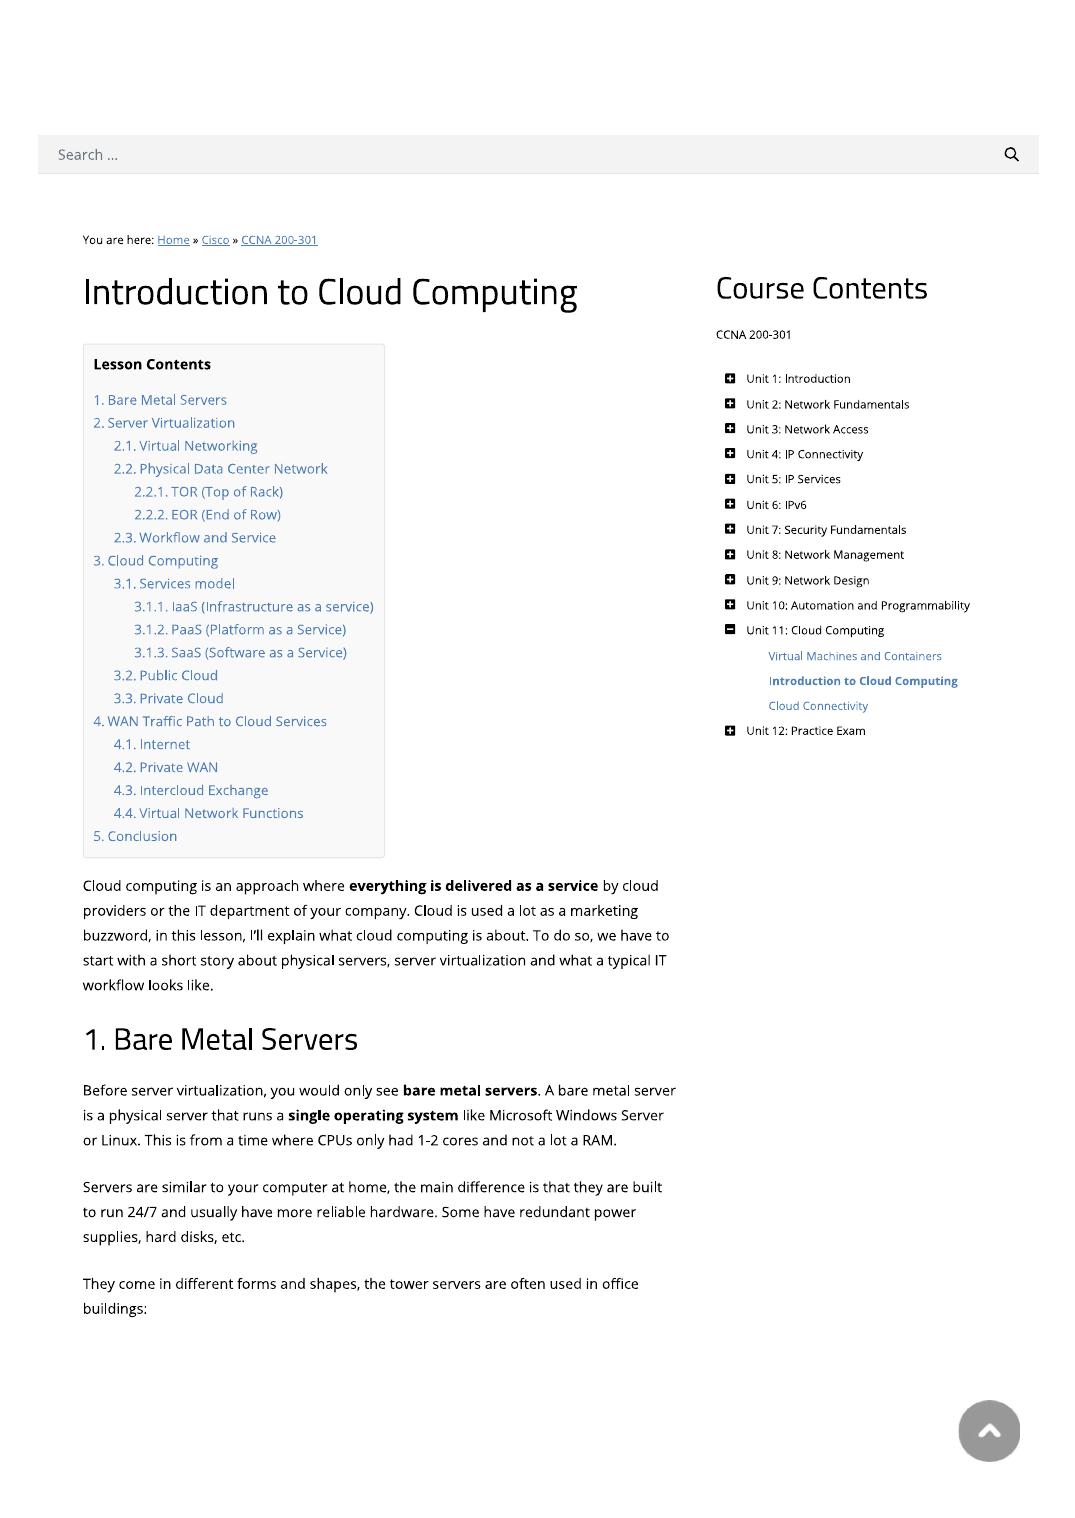 Introduction to Cloud Computing by Rohan